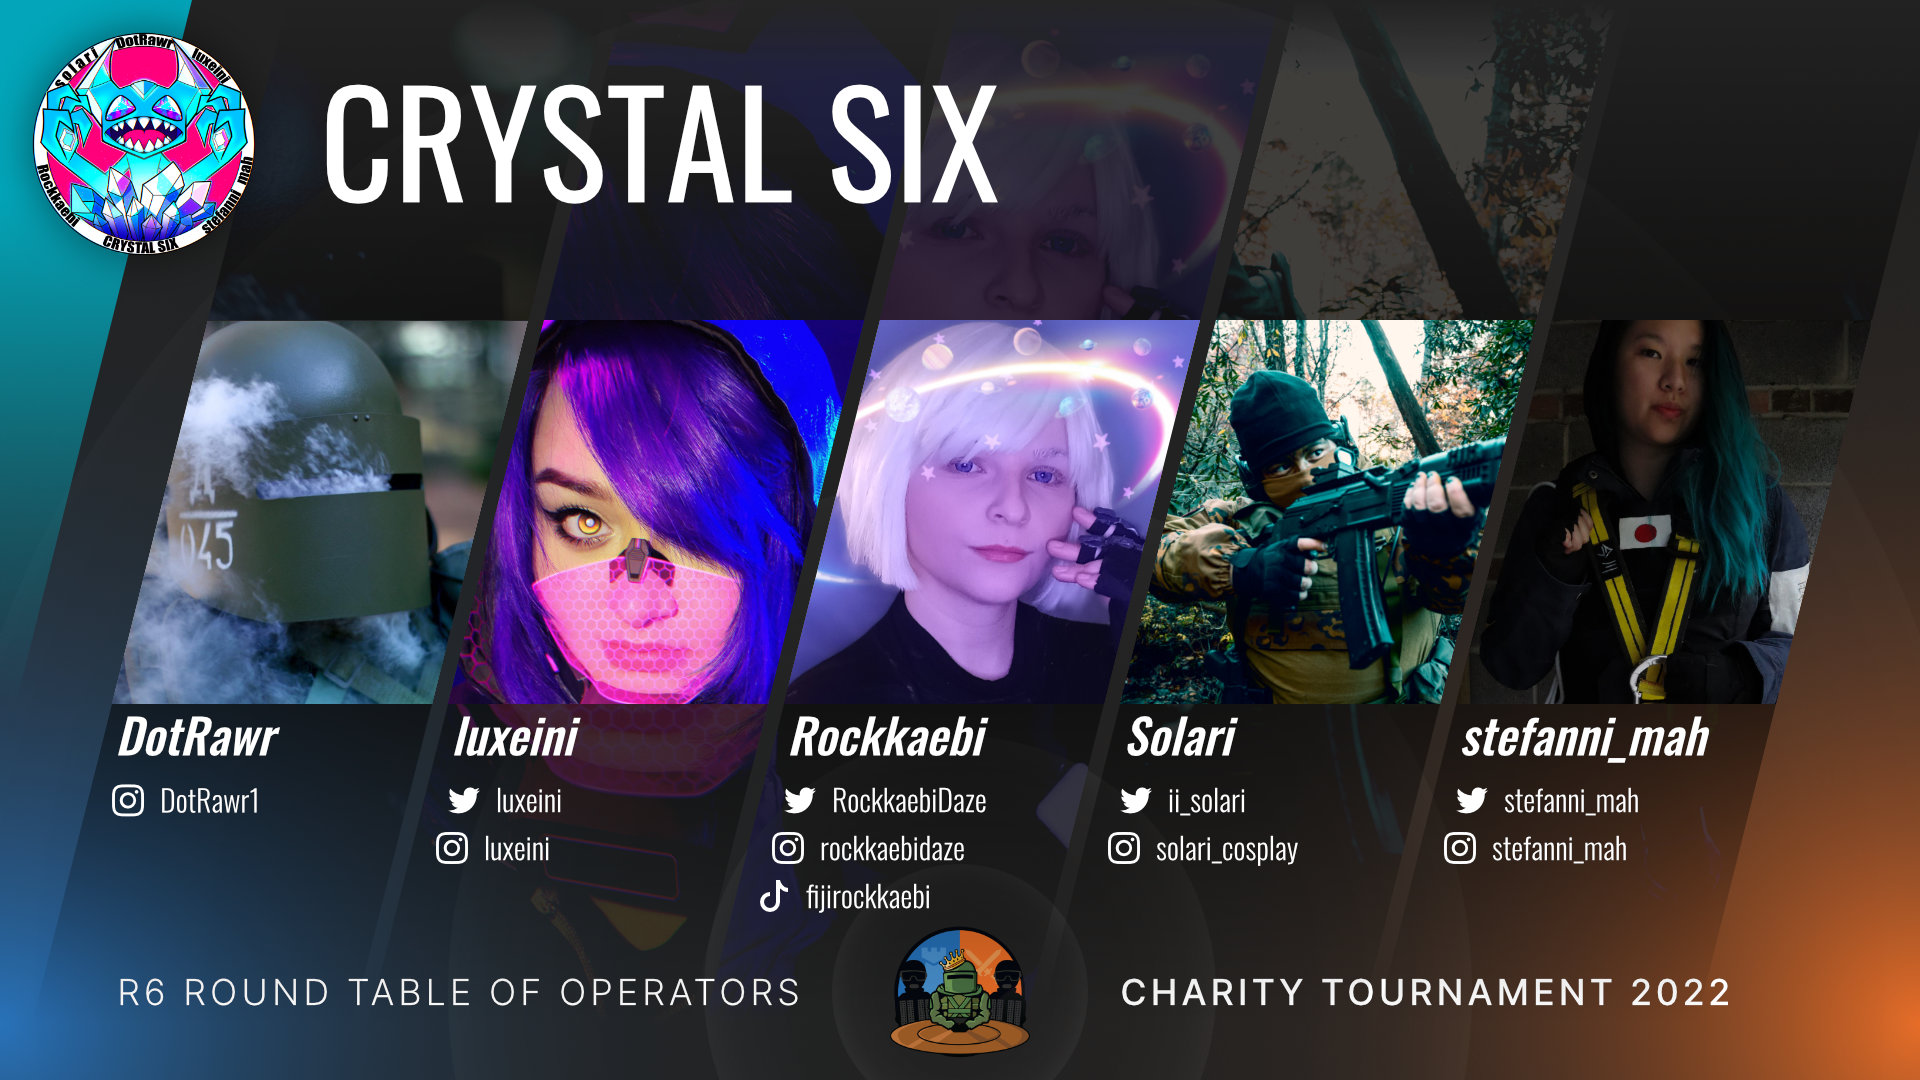 Graphics of the roster of Crystal Six